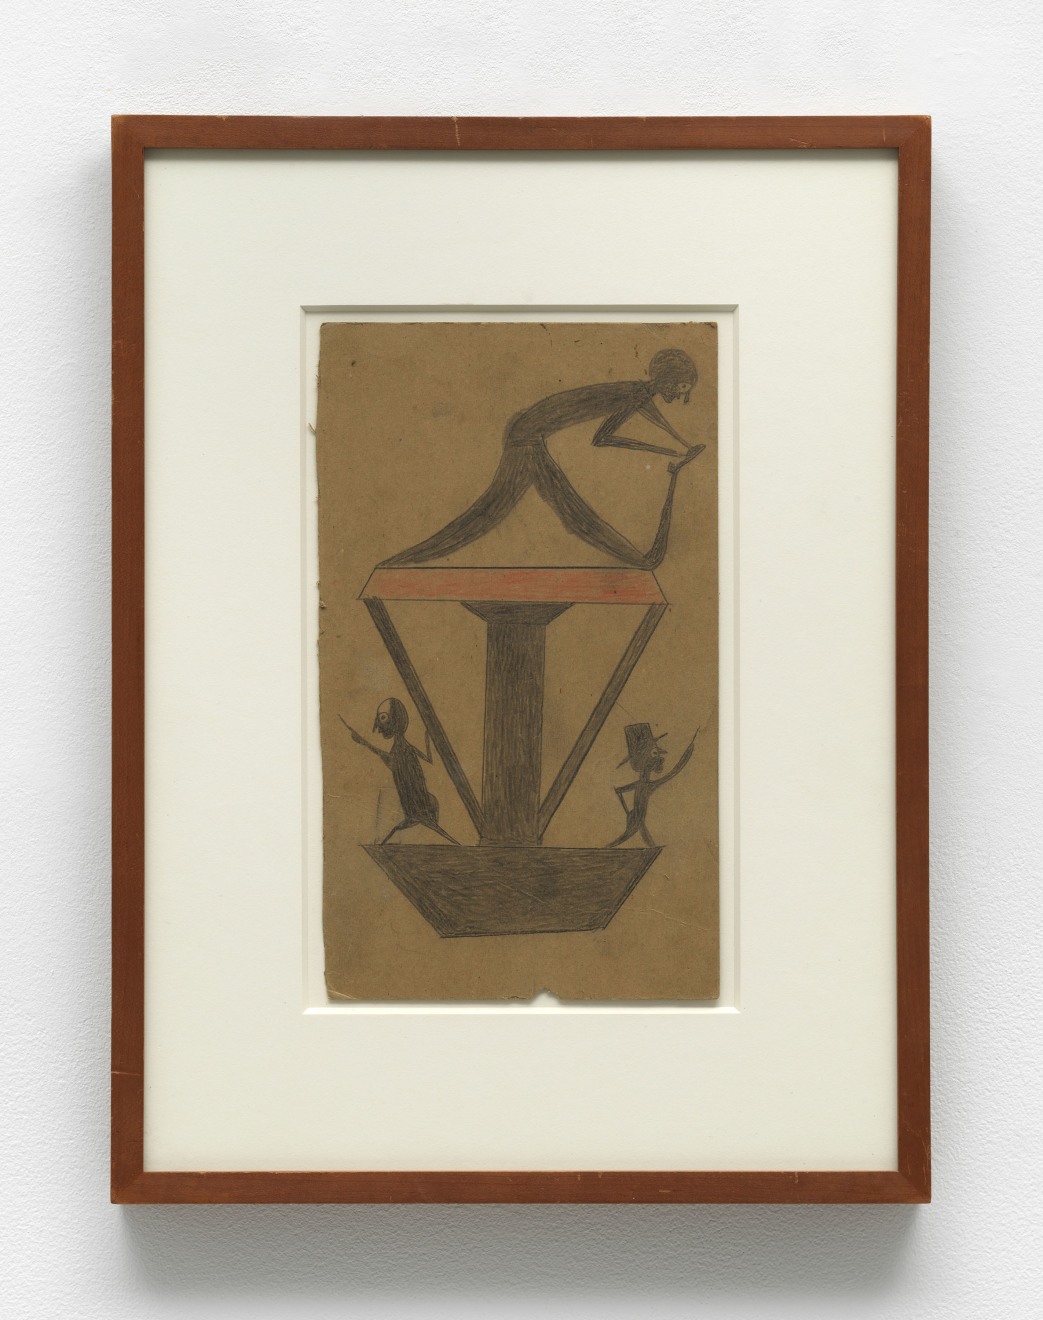 Bill Traylor, Untitled (Figures/Construction), c. 1939 - 1942